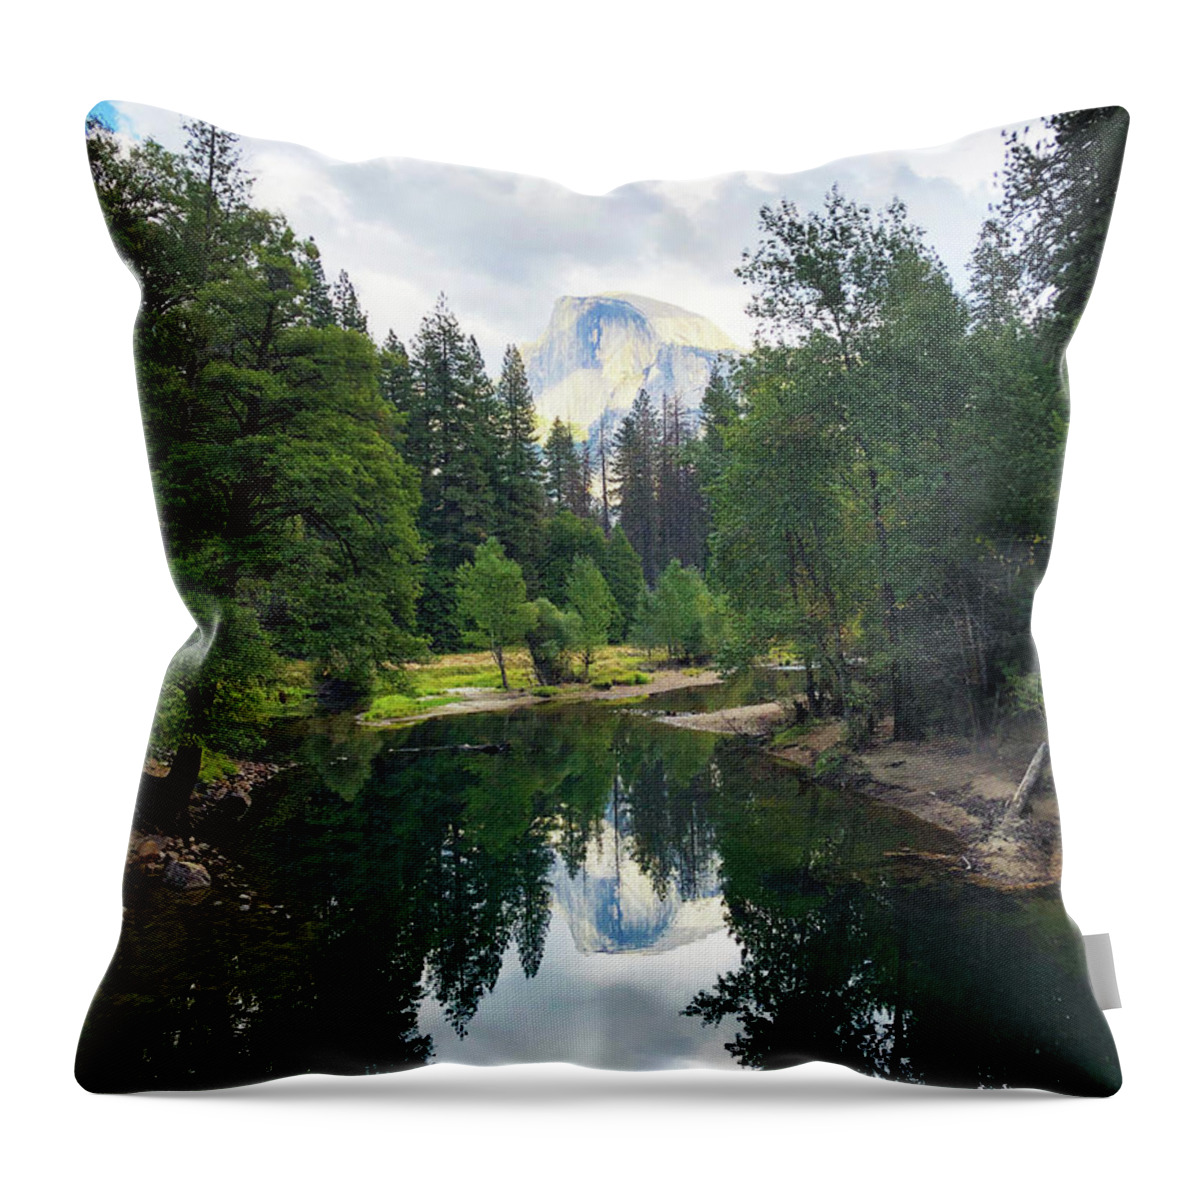 Skyline Throw Pillow featuring the photograph Yosemite classical view by Silvia Marcoschamer